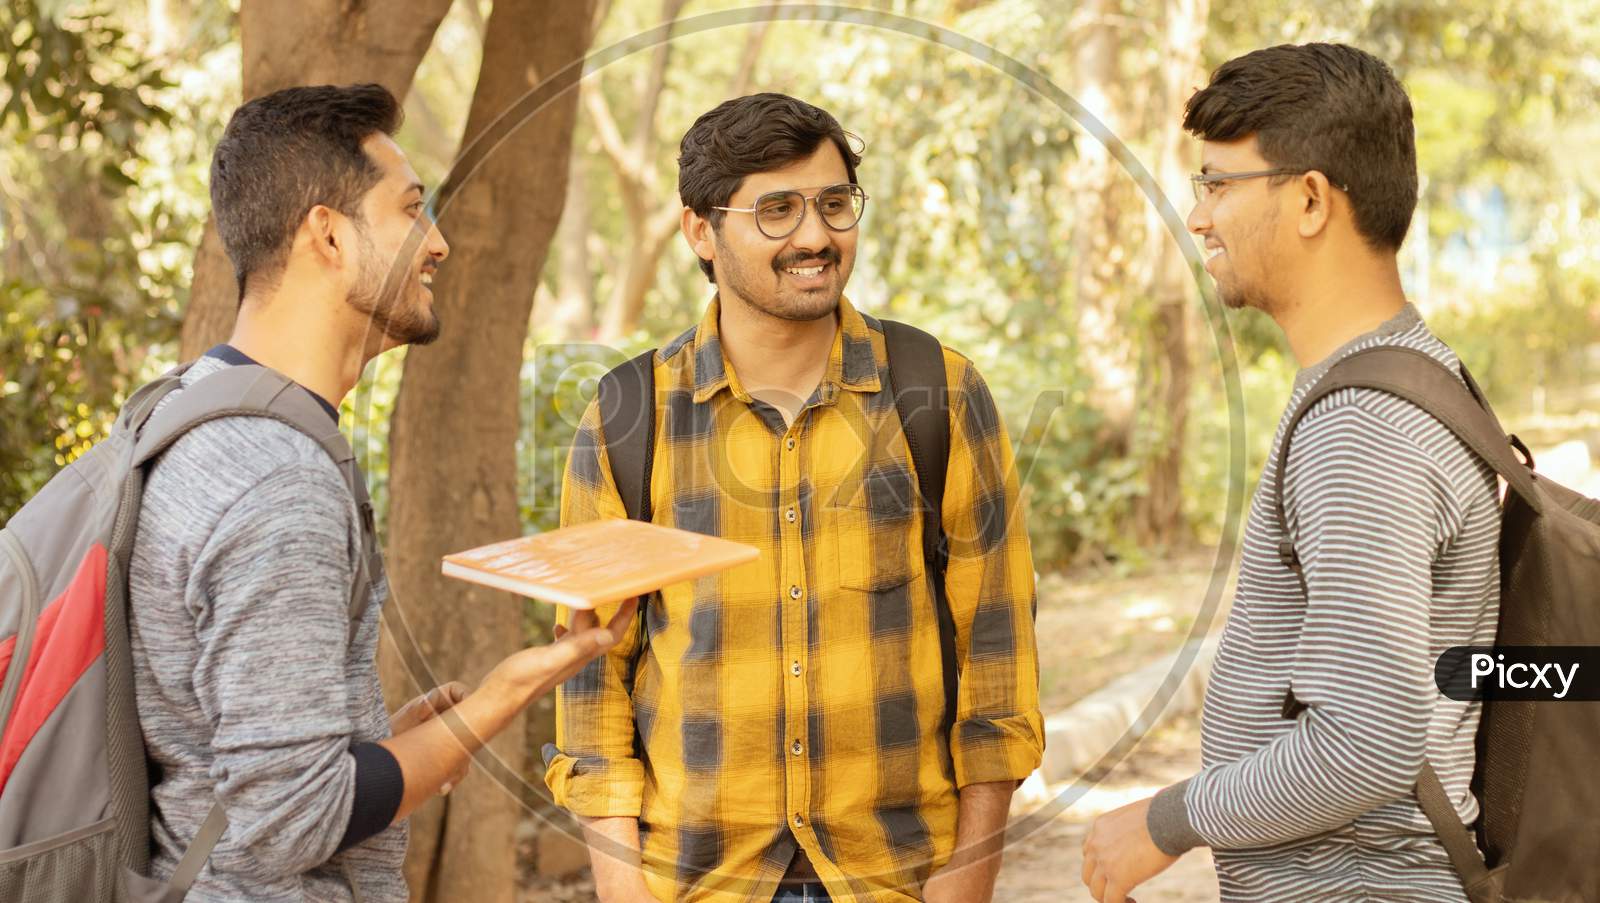 College Friends Socializing - Students Talking With Each Other At University Campus - Concept Of Happy College Days And Student Life.